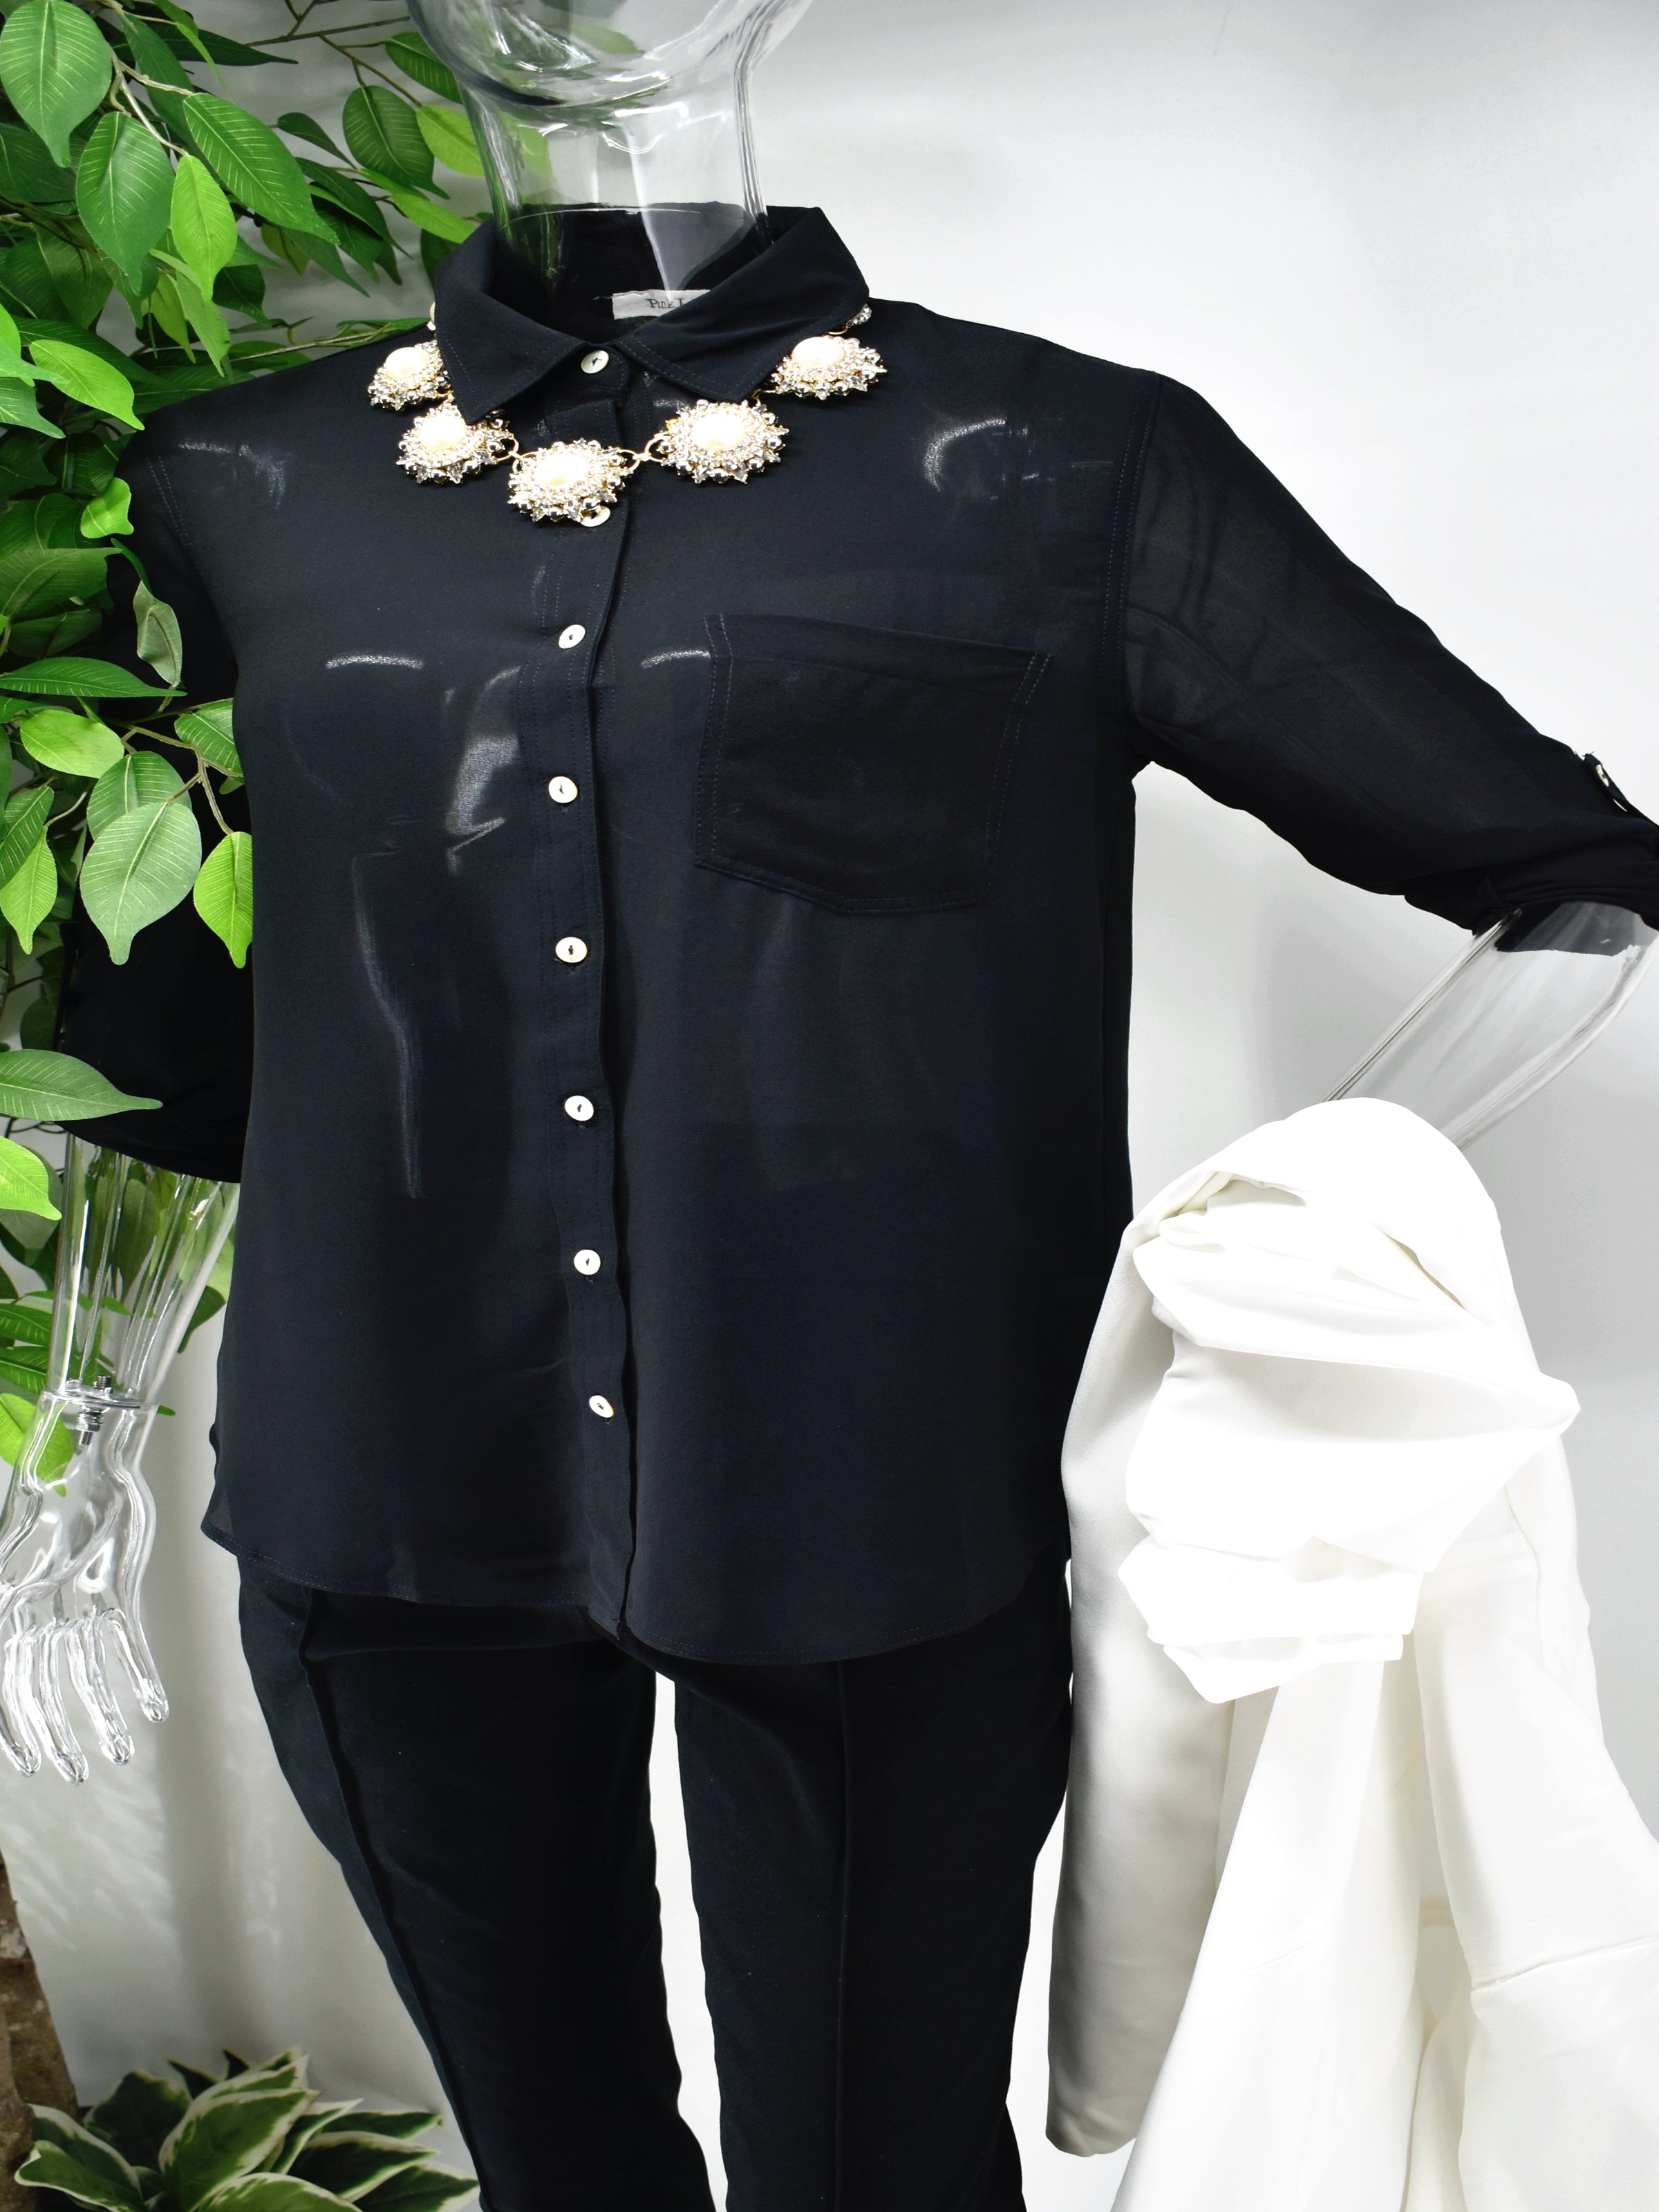 Enjoy an elegant design that never fades with our classic Bayla shirt blouse. Our Bayla is a black button front shirt blouse loose in fit with a classic rolled cuffed sleeve. 